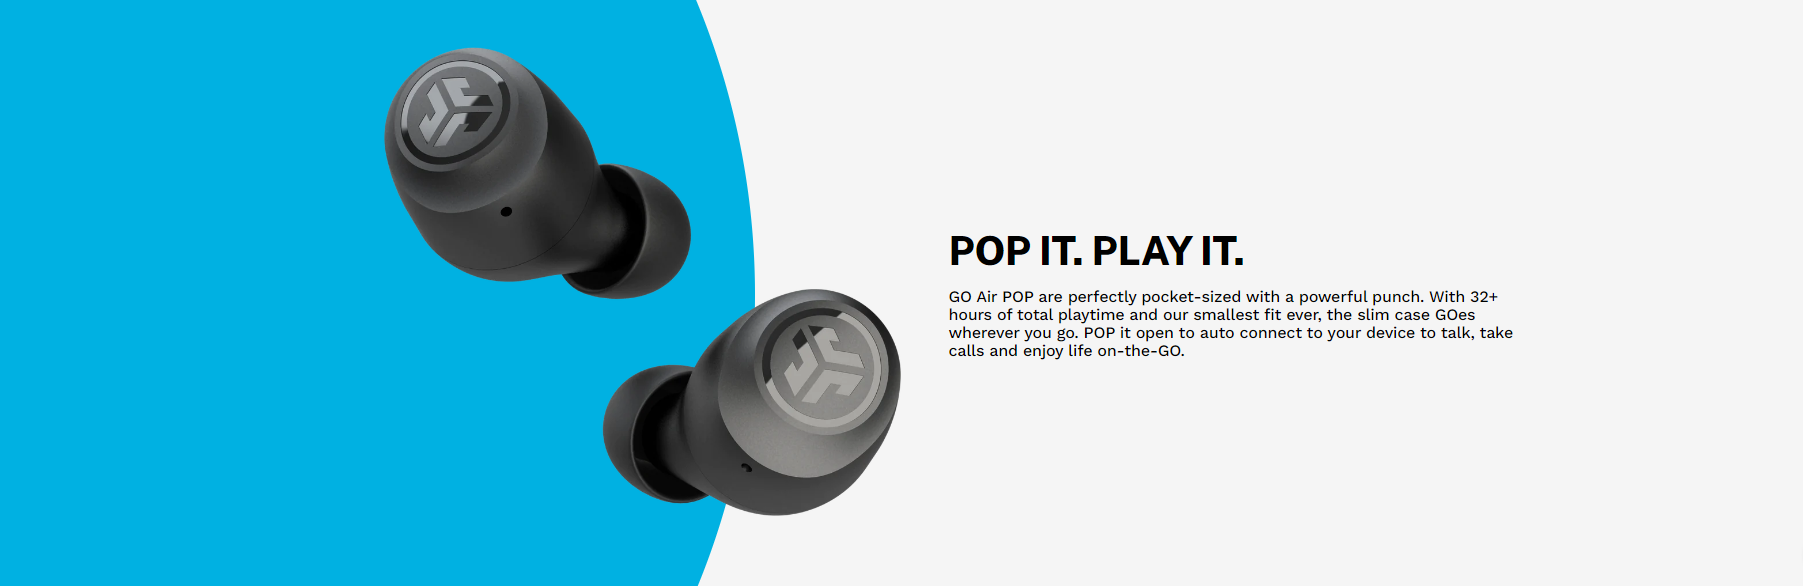 JLab Go Air Pop True Wireless Bluetooth Earbuds + Charging Case, Lilac,  Dual Connect, IPX4 Sweat Resistance, Bluetooth 5.1 Connection, 3 EQ Sound